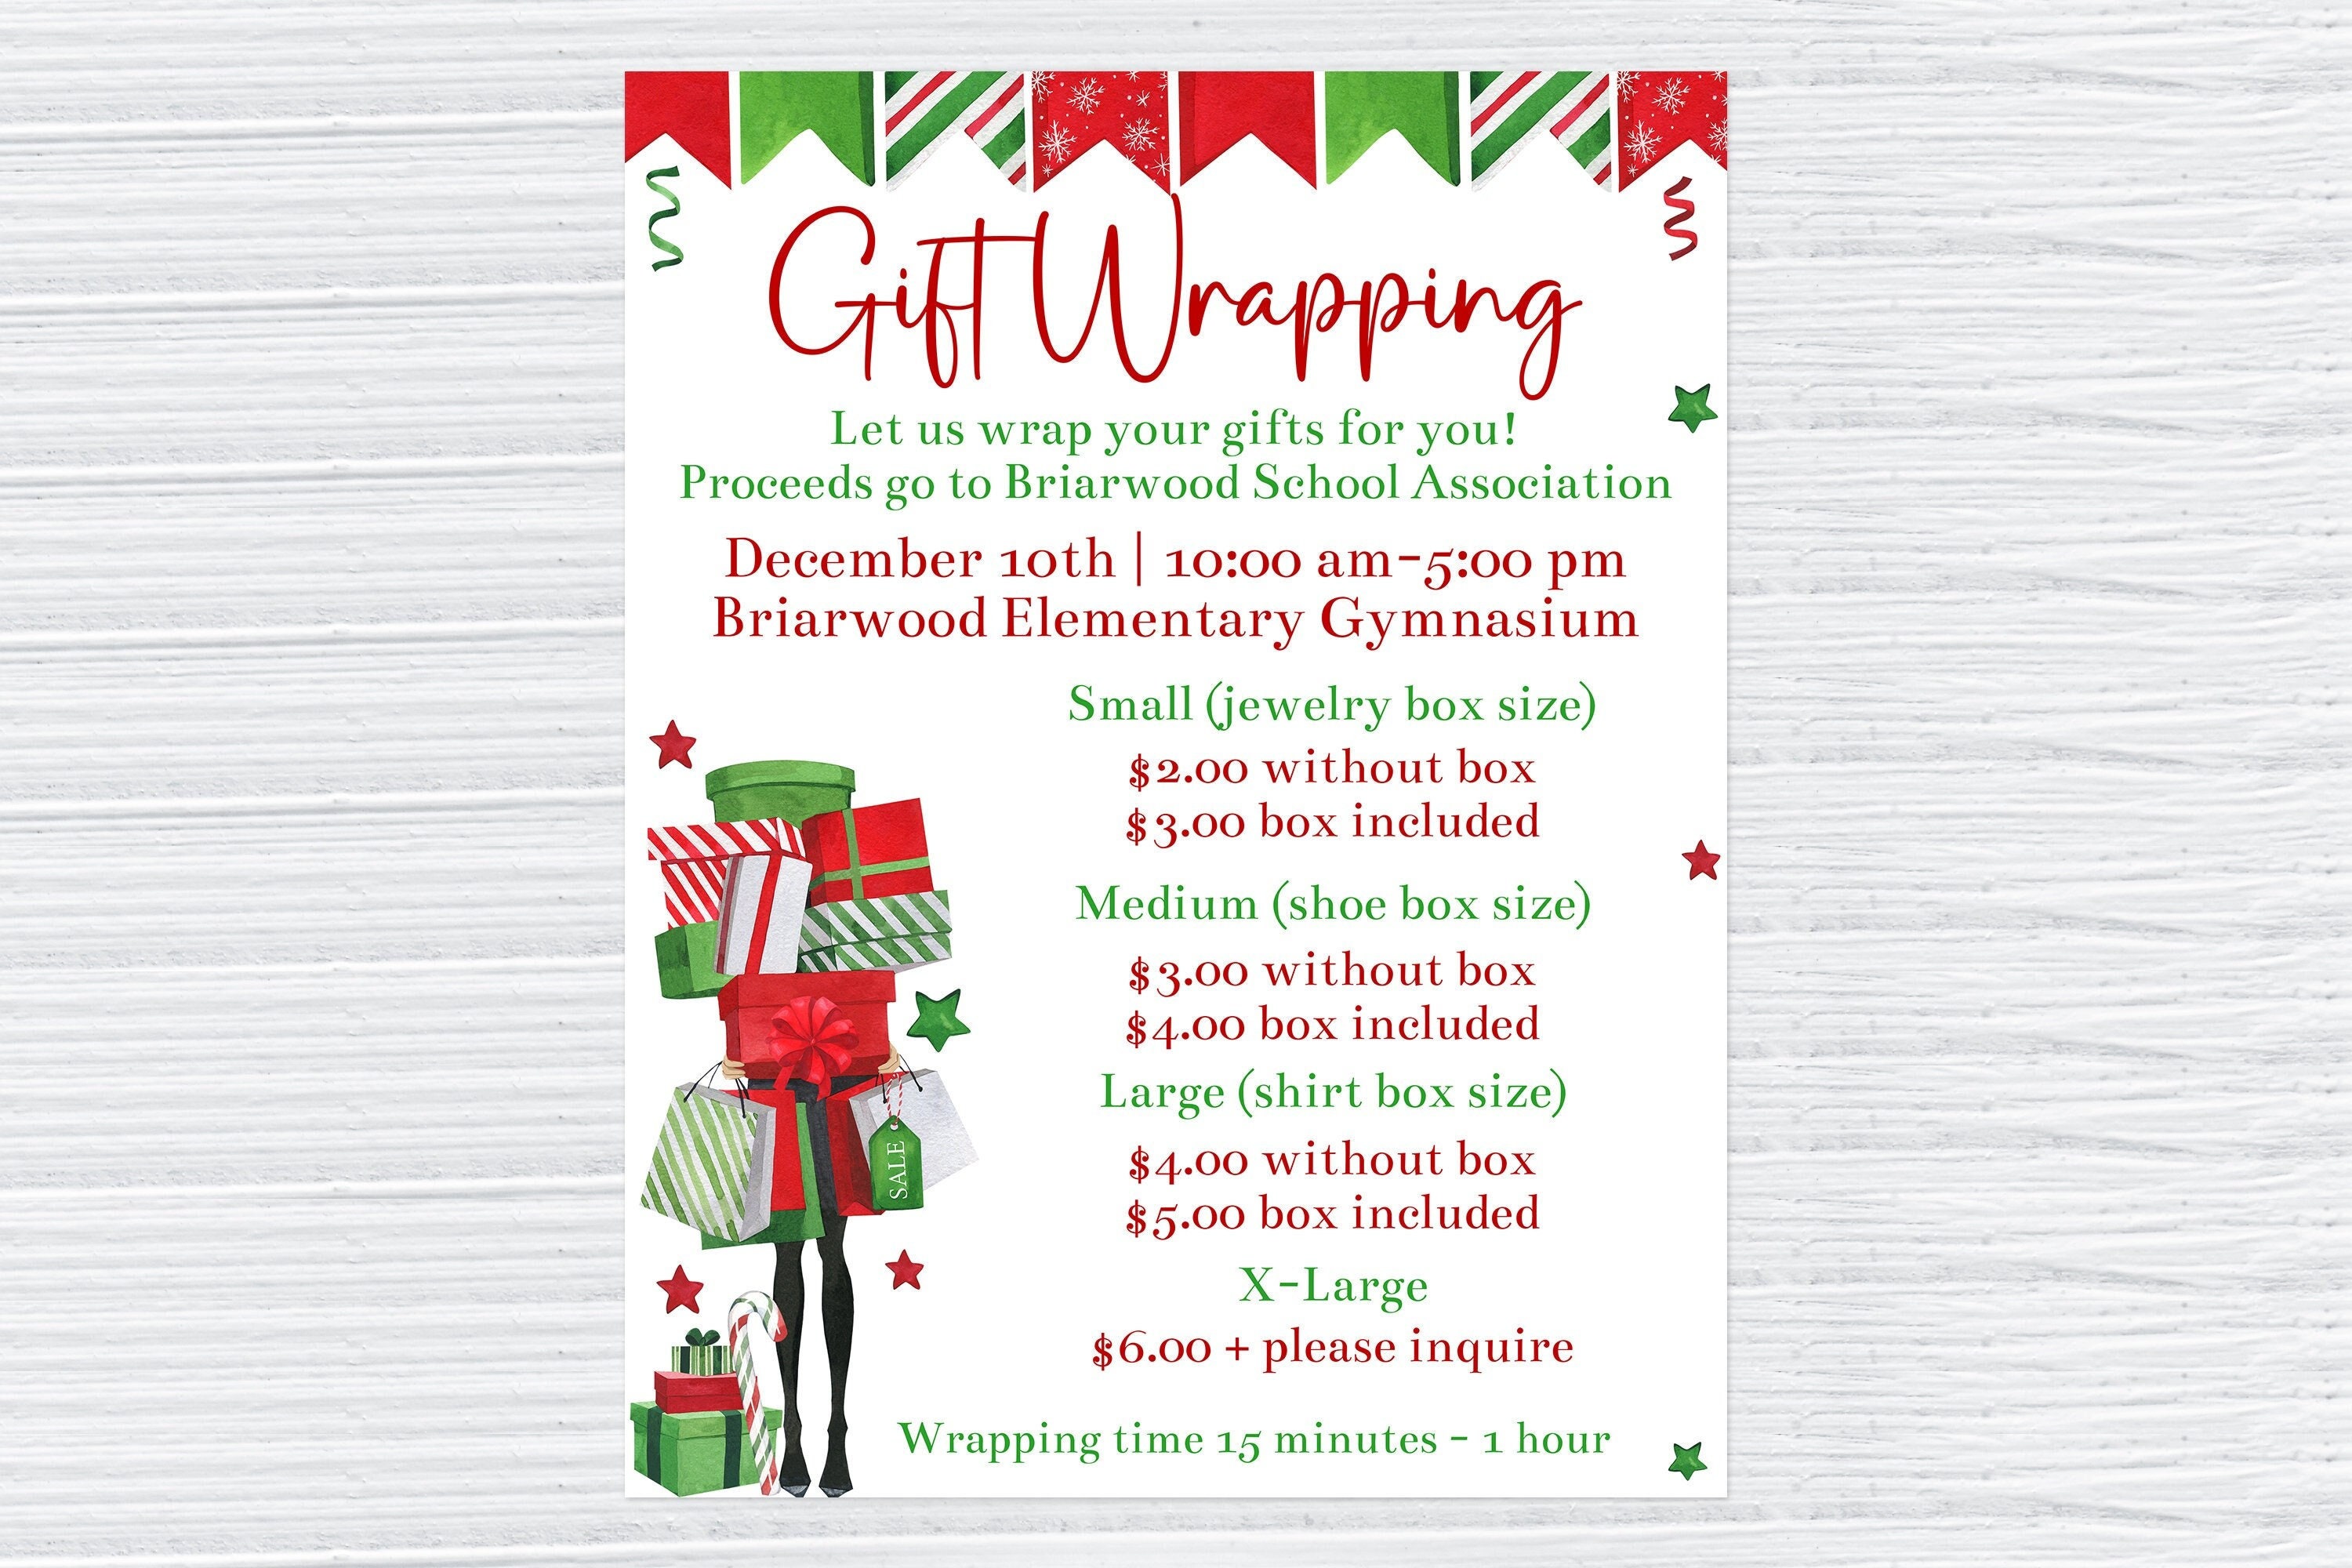 Editable gift wrap fundraiser template school gift wrapping flyer x printable winter school fundraiser church fundraiser corjl download now